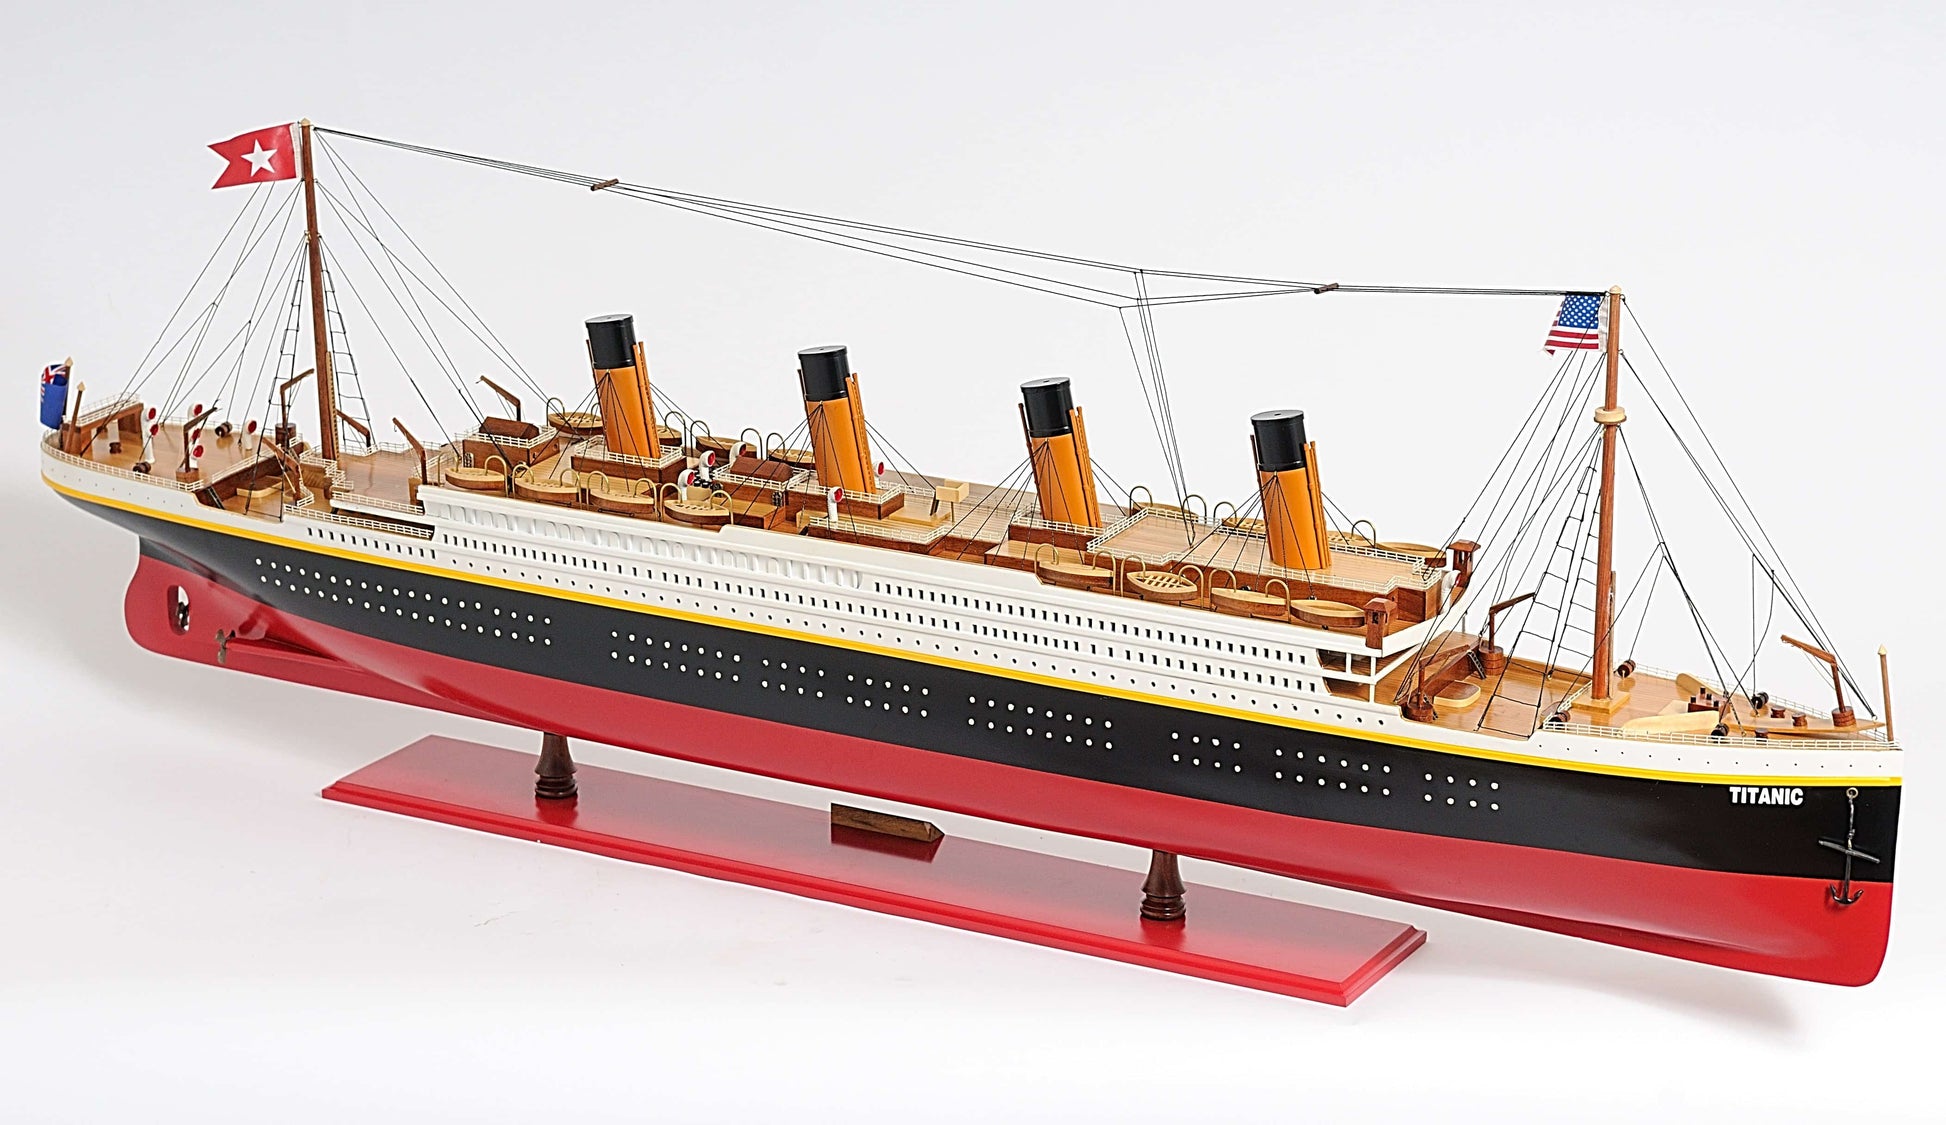 ALDO Hobbies & Creative Arts> Collectibles> Scale Model L: 56 W: 6 H: 19.25 Inches / NEW / Wood RMS Titanic Painted XL Large Passenger Ship Ocean Liner Wood Model Assembled